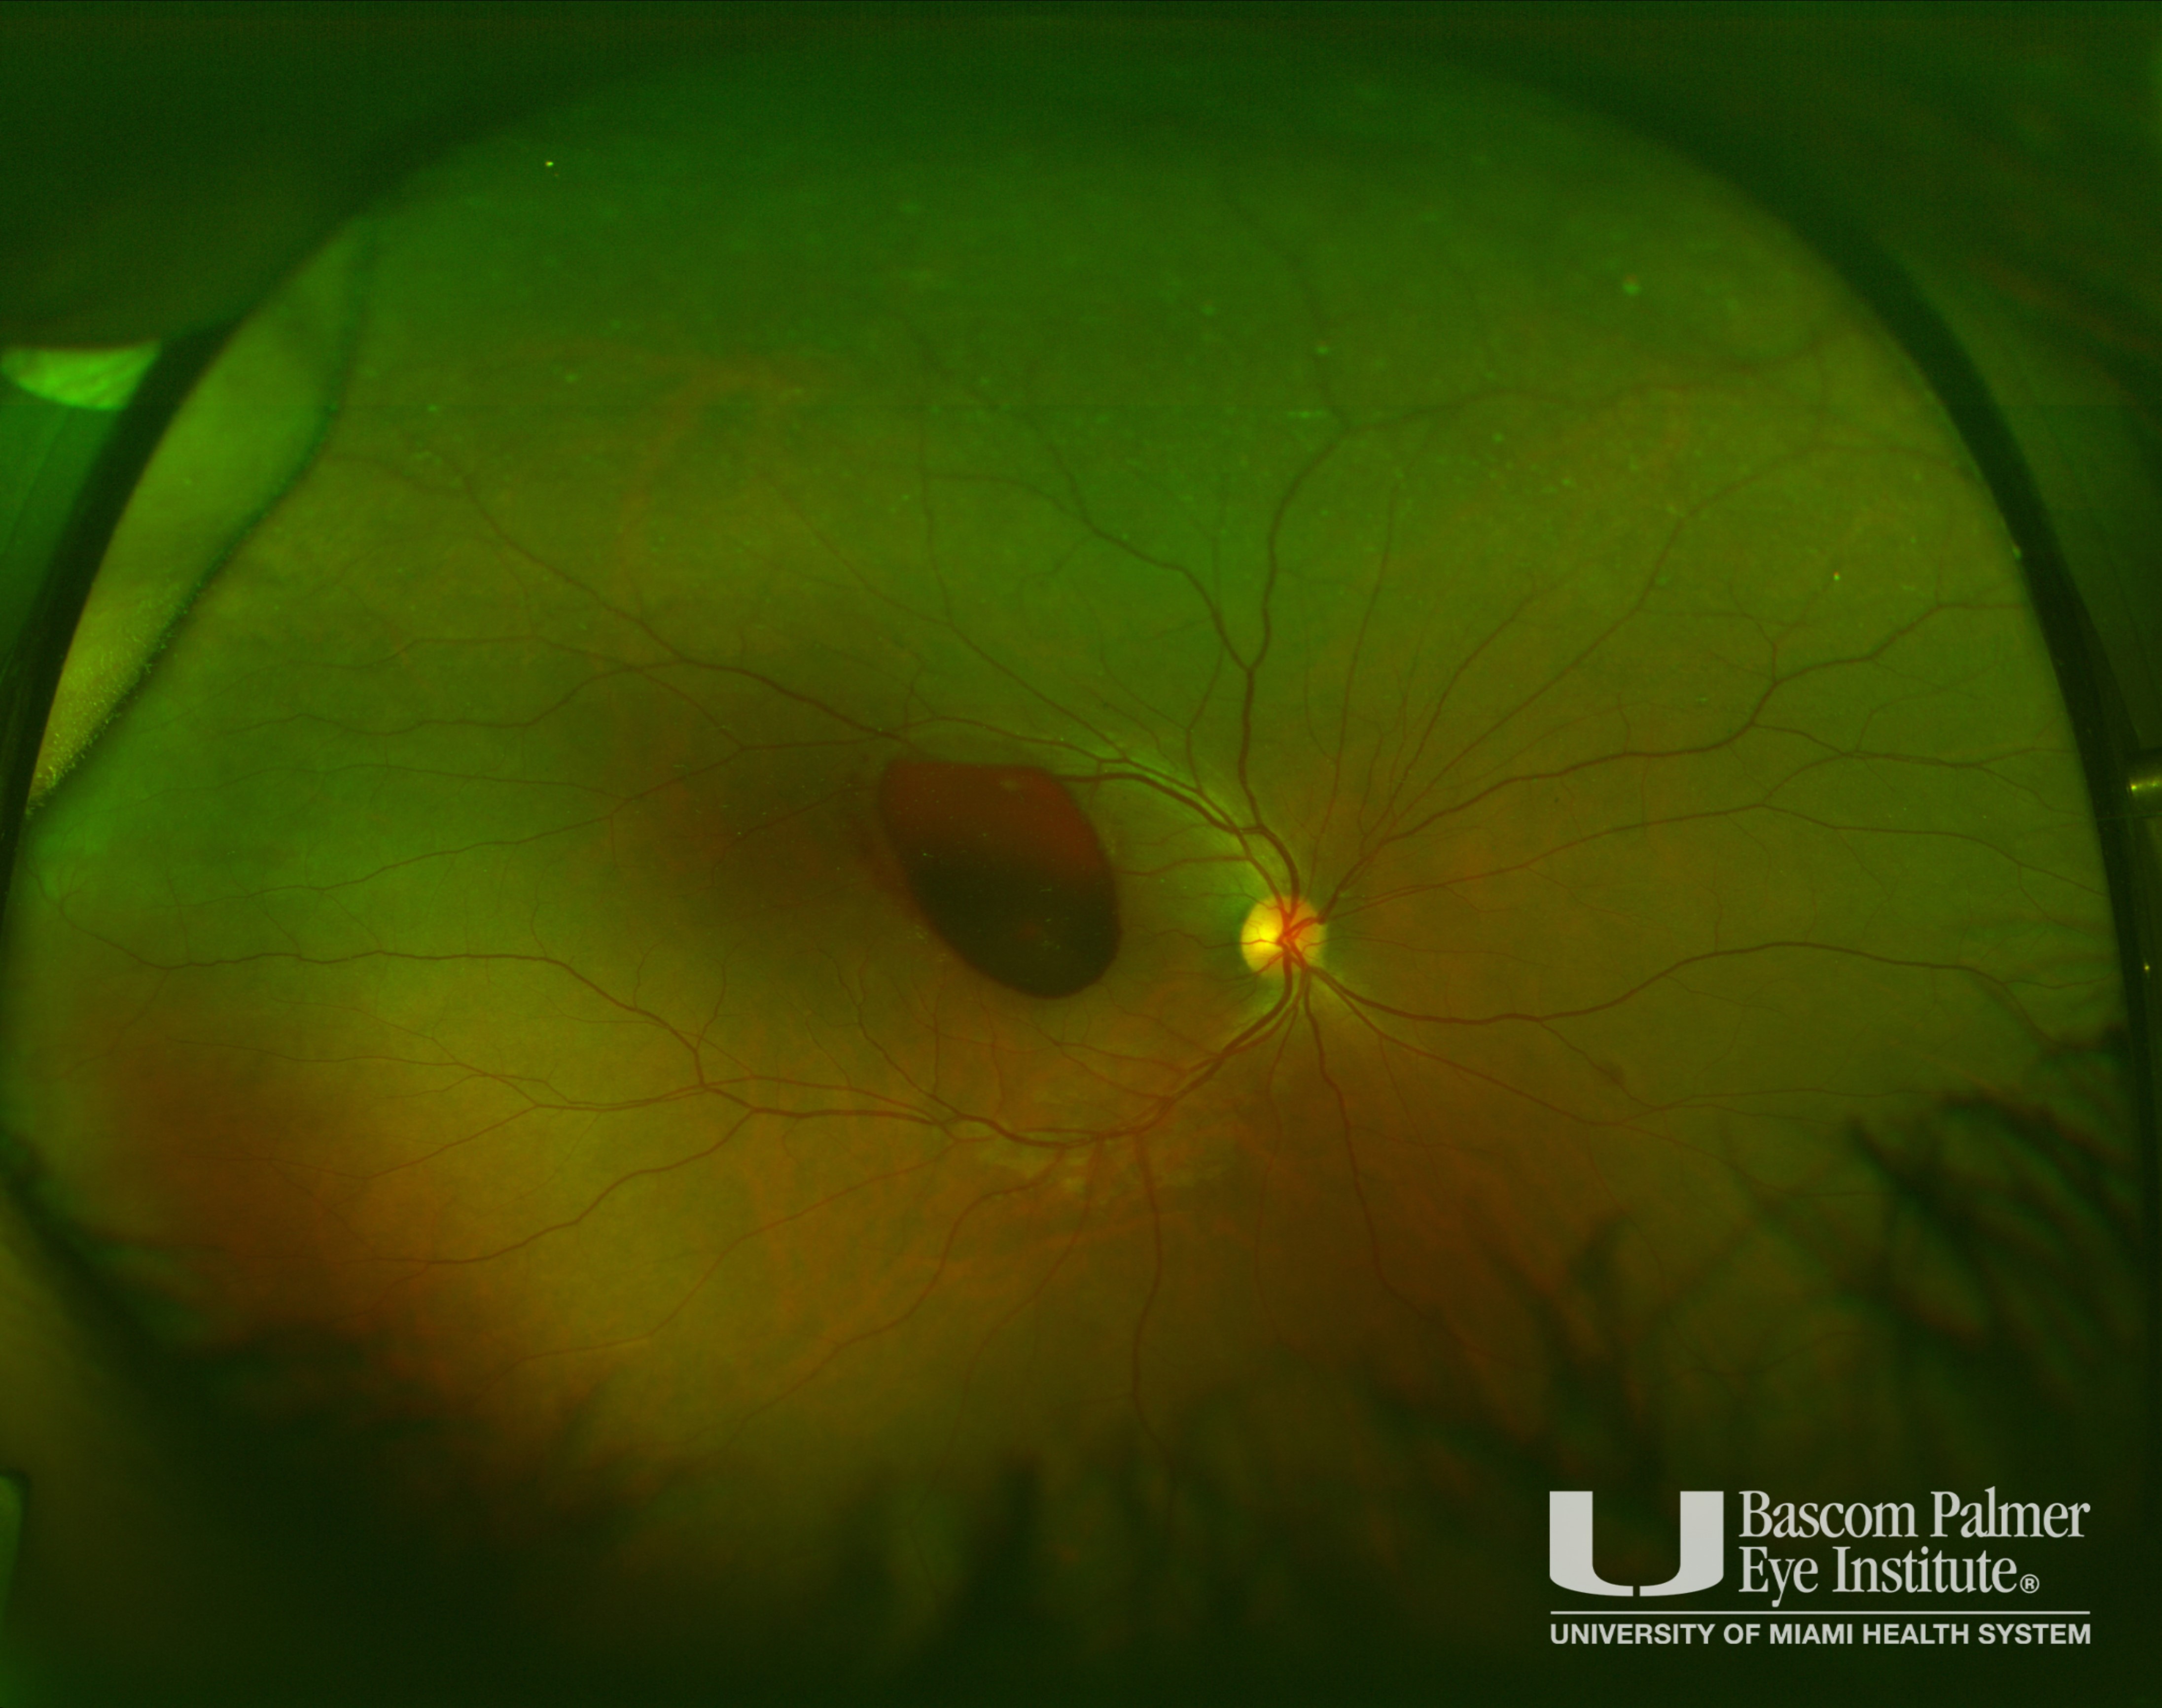 A patient with premacular hemorrhage secondary to Valsalva retinopathy